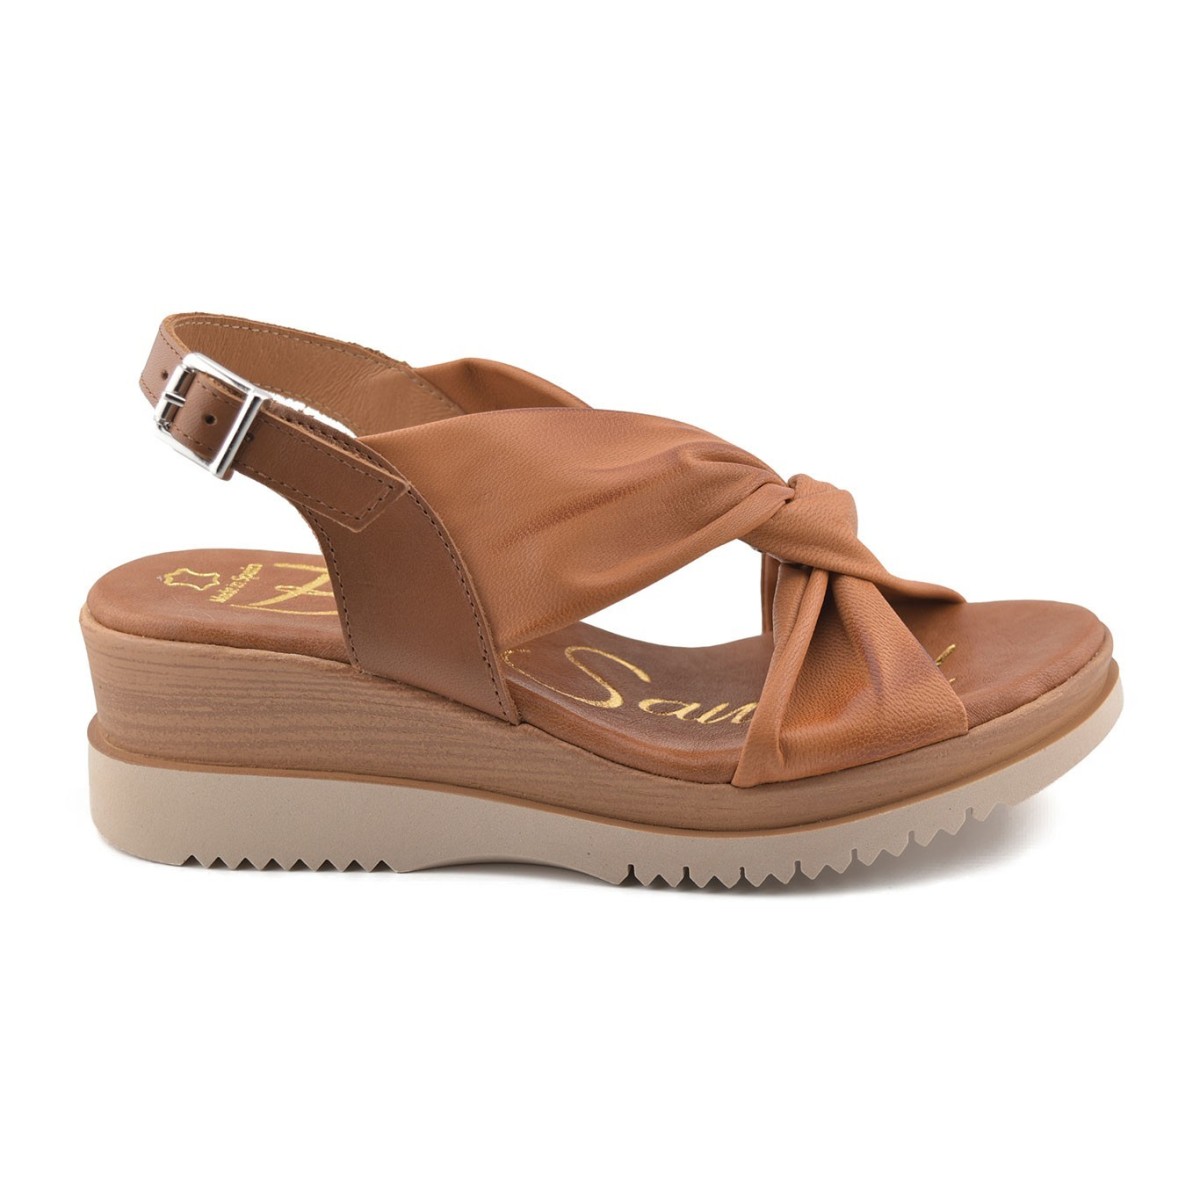 Brown Leather Sandals by Blusandal